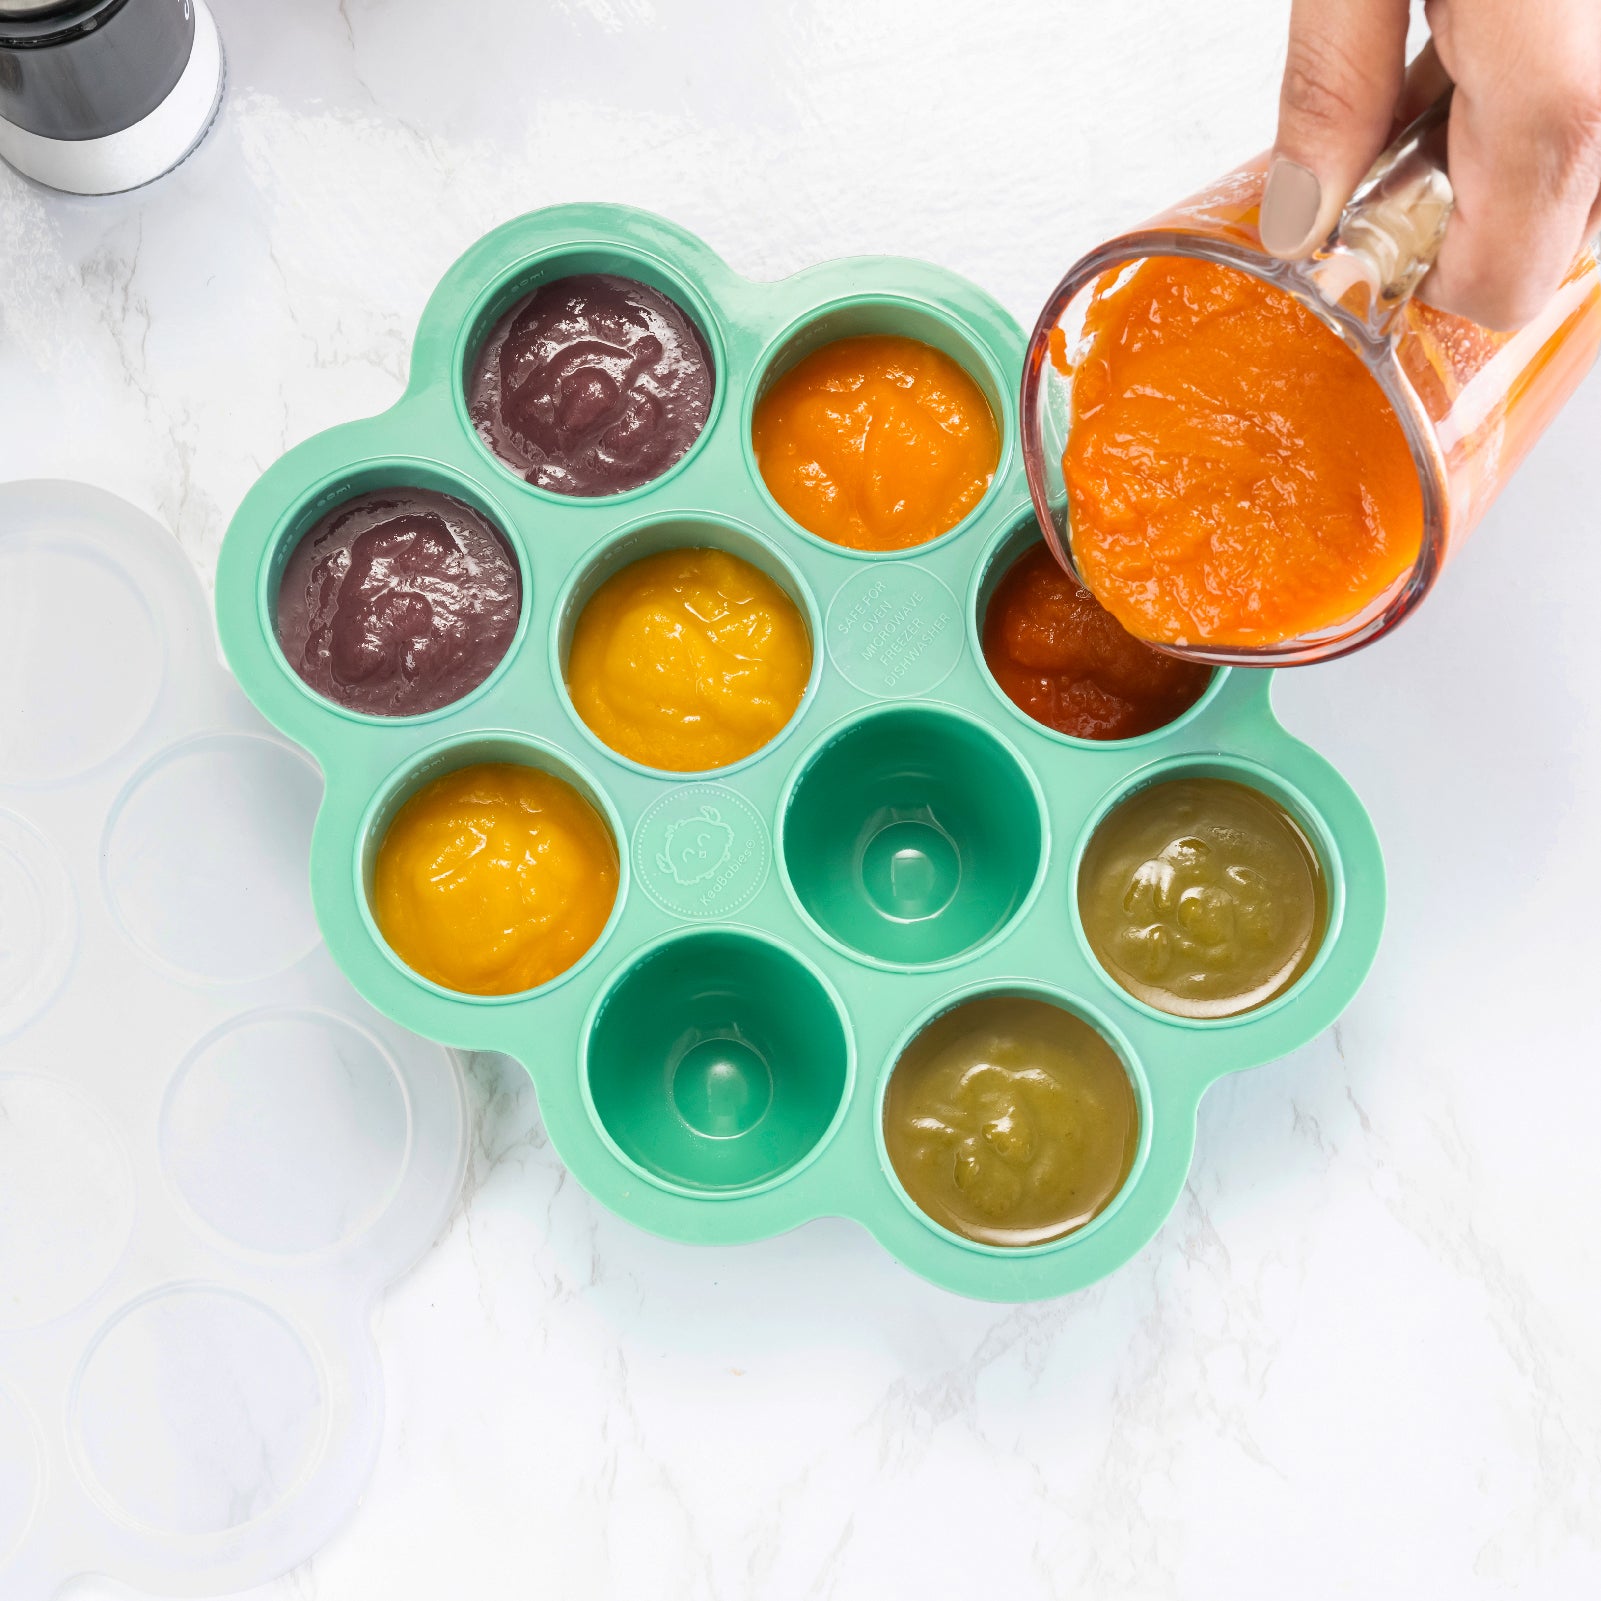 Silicone Baby Food Freezer Tray with Clip-On Lid by WeeSprout - Perfect Storage